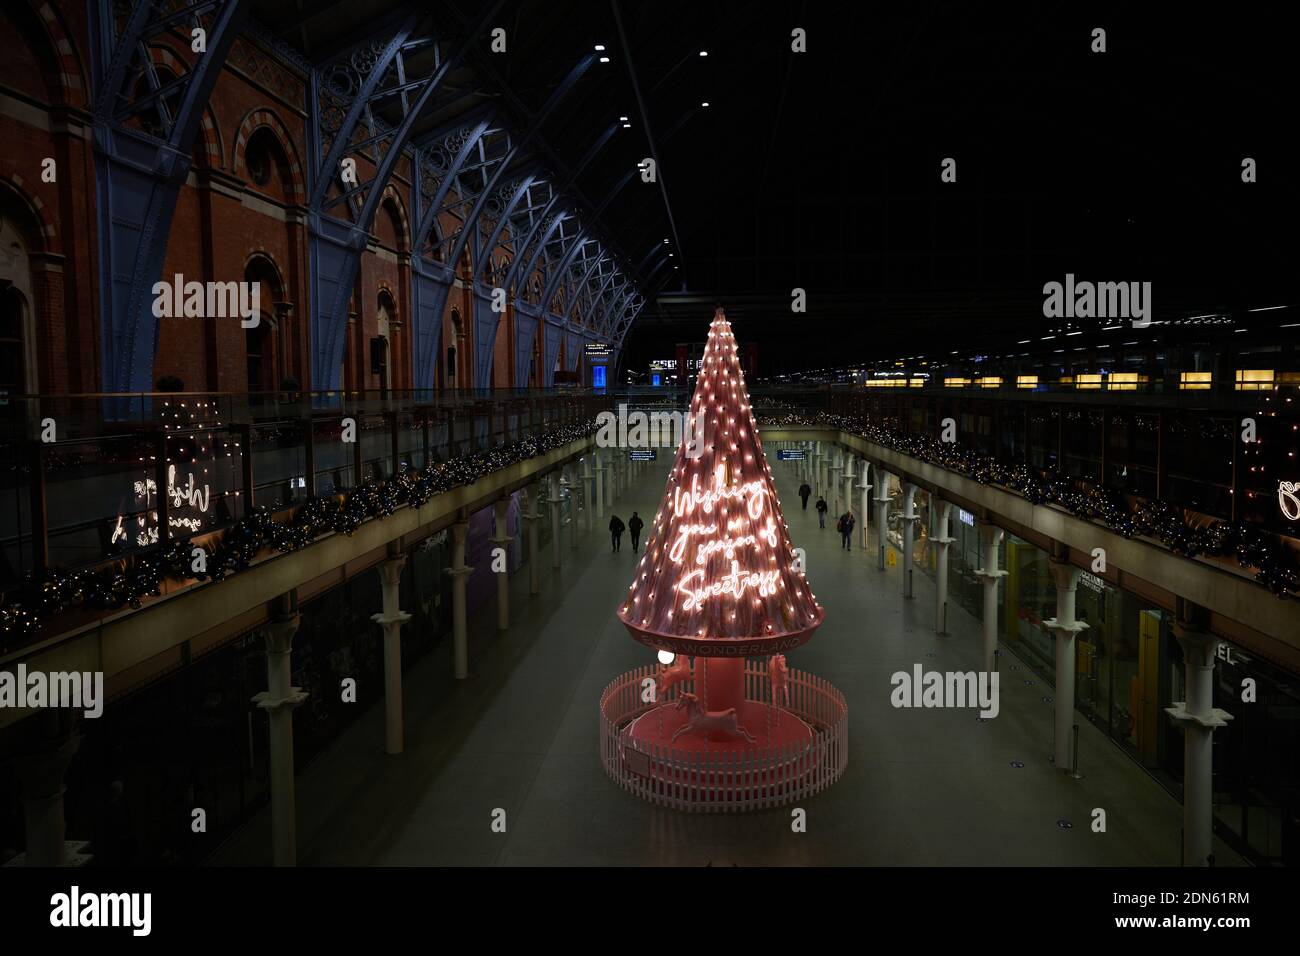 London, UK. - 1 Dec 2020: A tree of hope, sponsored by EL&N cafe, forms part of the Christmas 2020 display at St. Pancras Station. Stock Photo